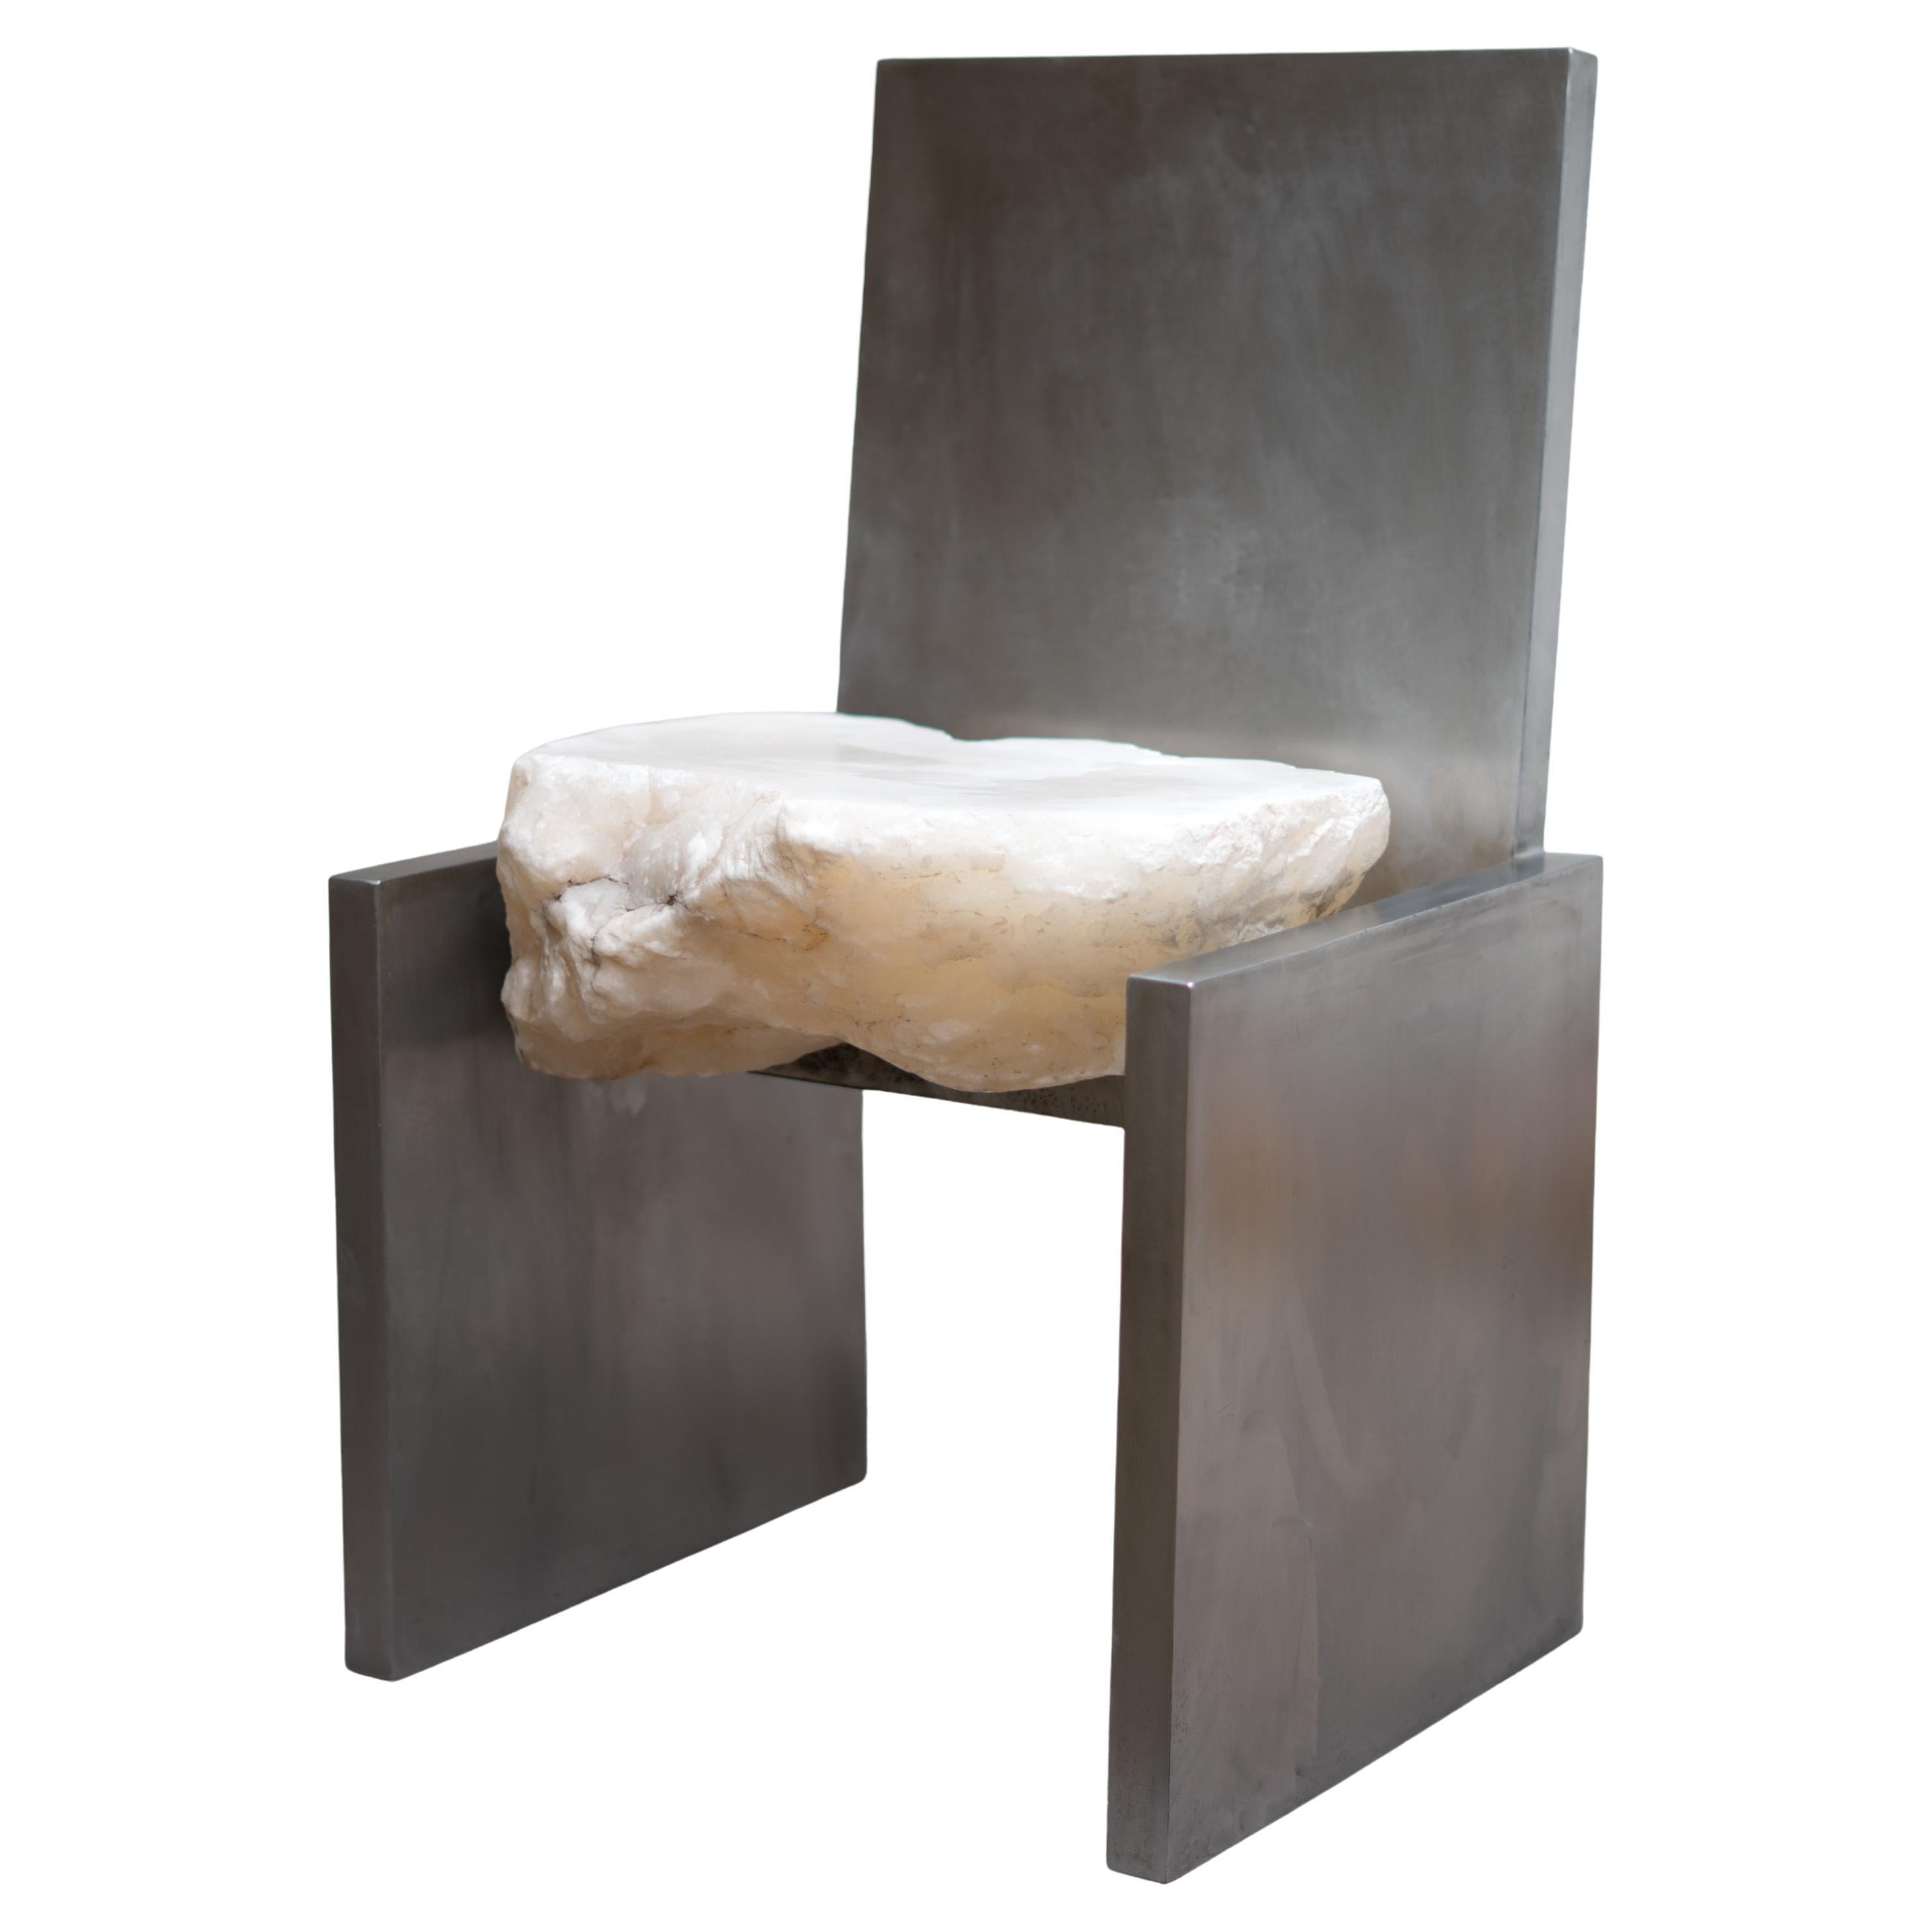 'Foreign Bodies – Arrival - Ceres N1 Chair' – by Collin Velkoff For Sale